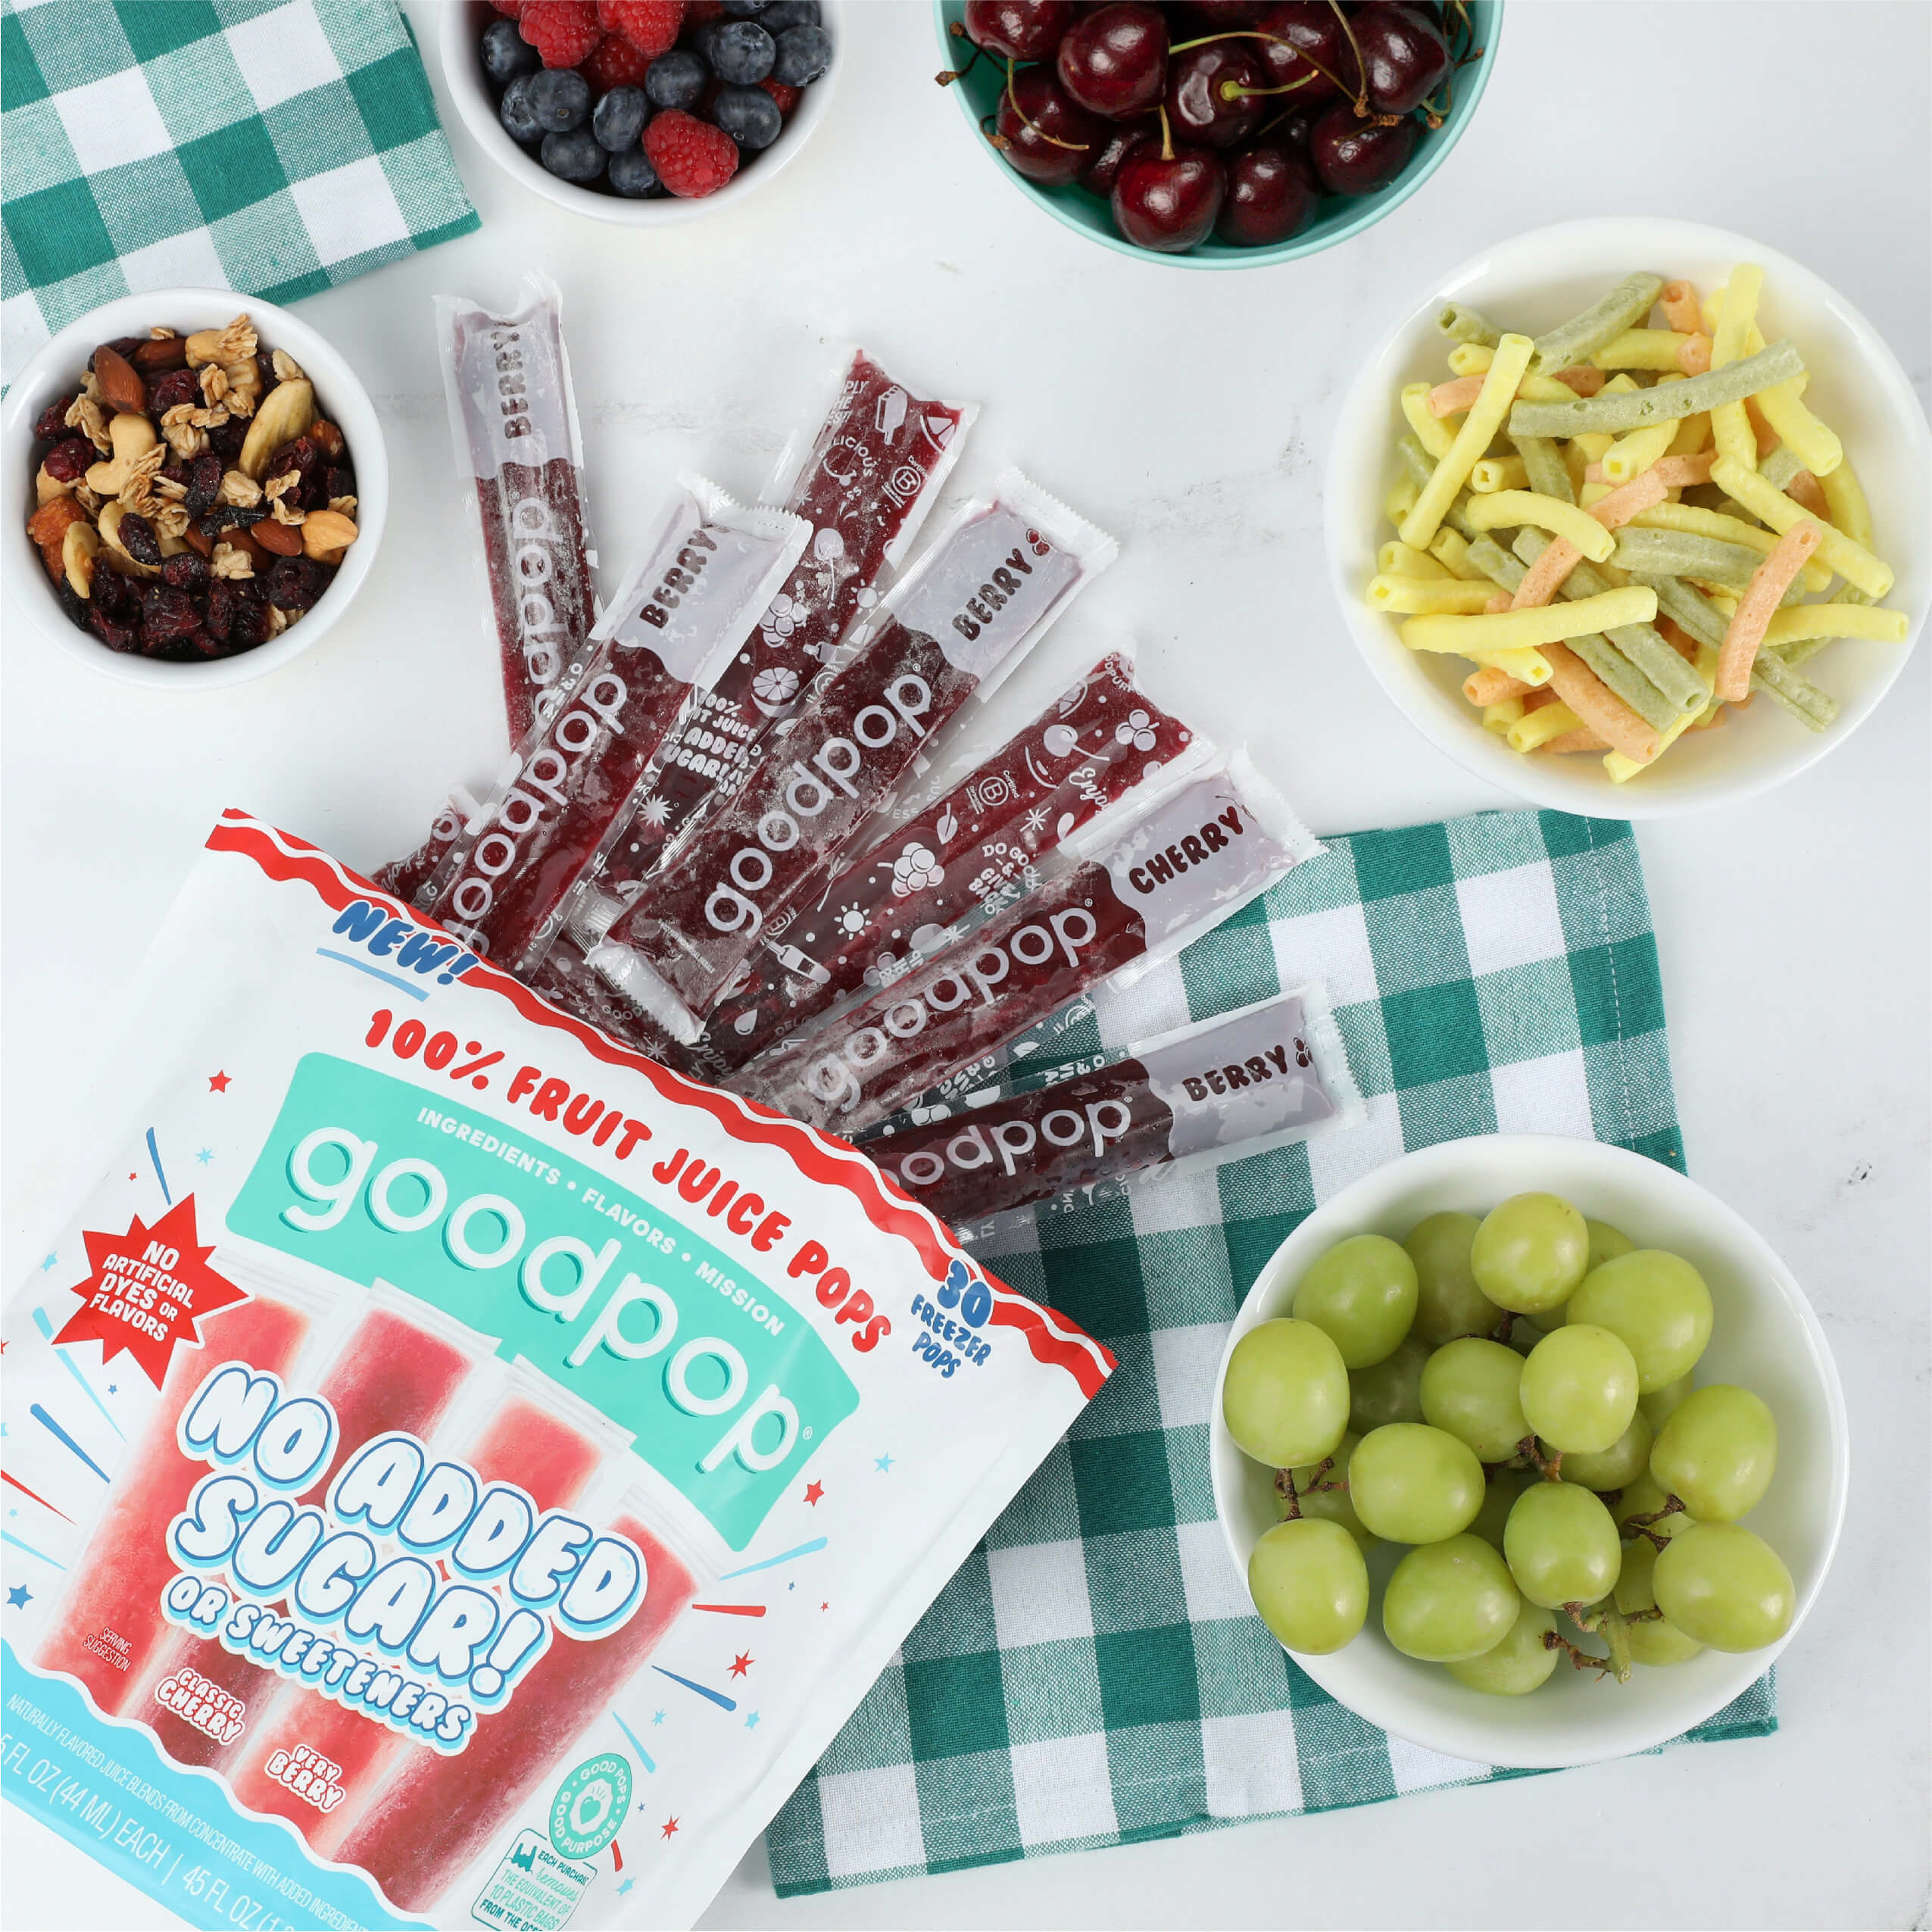 Opened bag of GoodPop Cherry Berry Freezer Pops lay on a picnic table with other healthy snacks